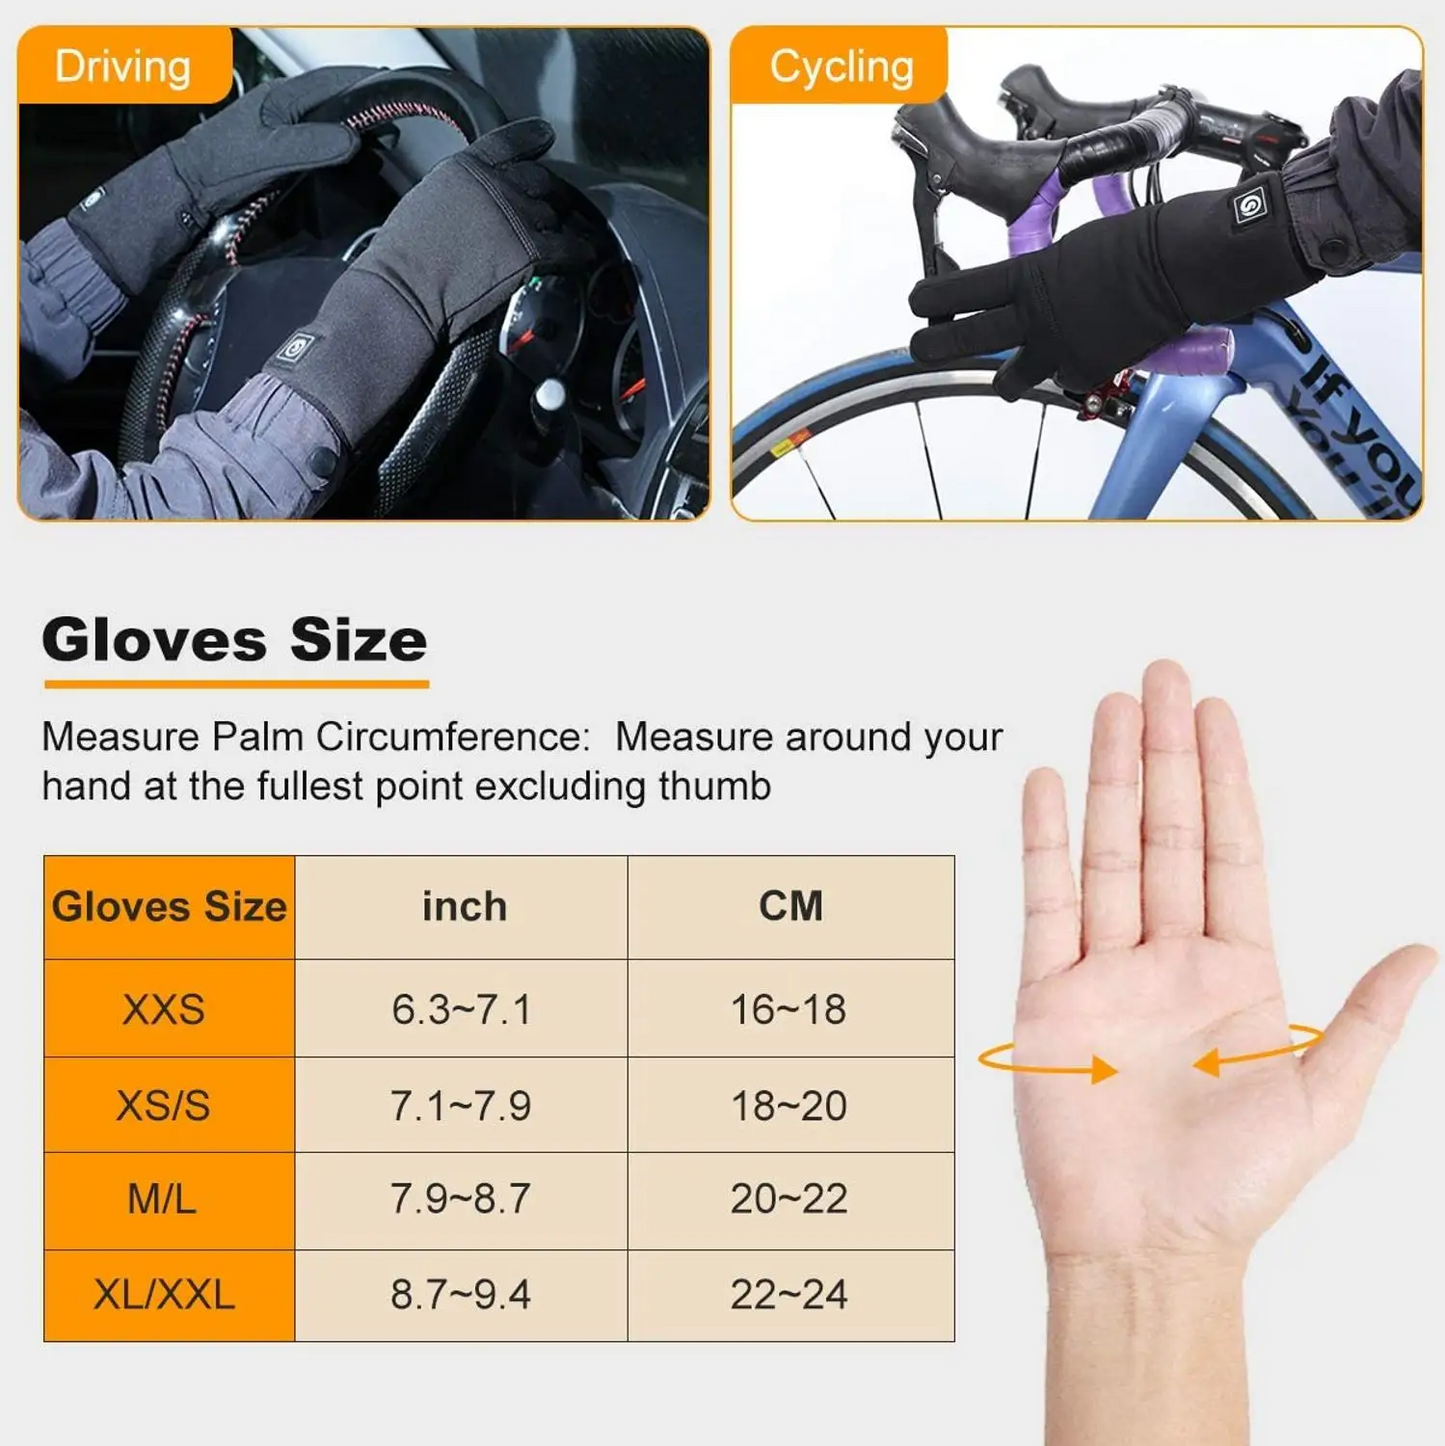 Rechargeable Heated Battery Lined Gloves